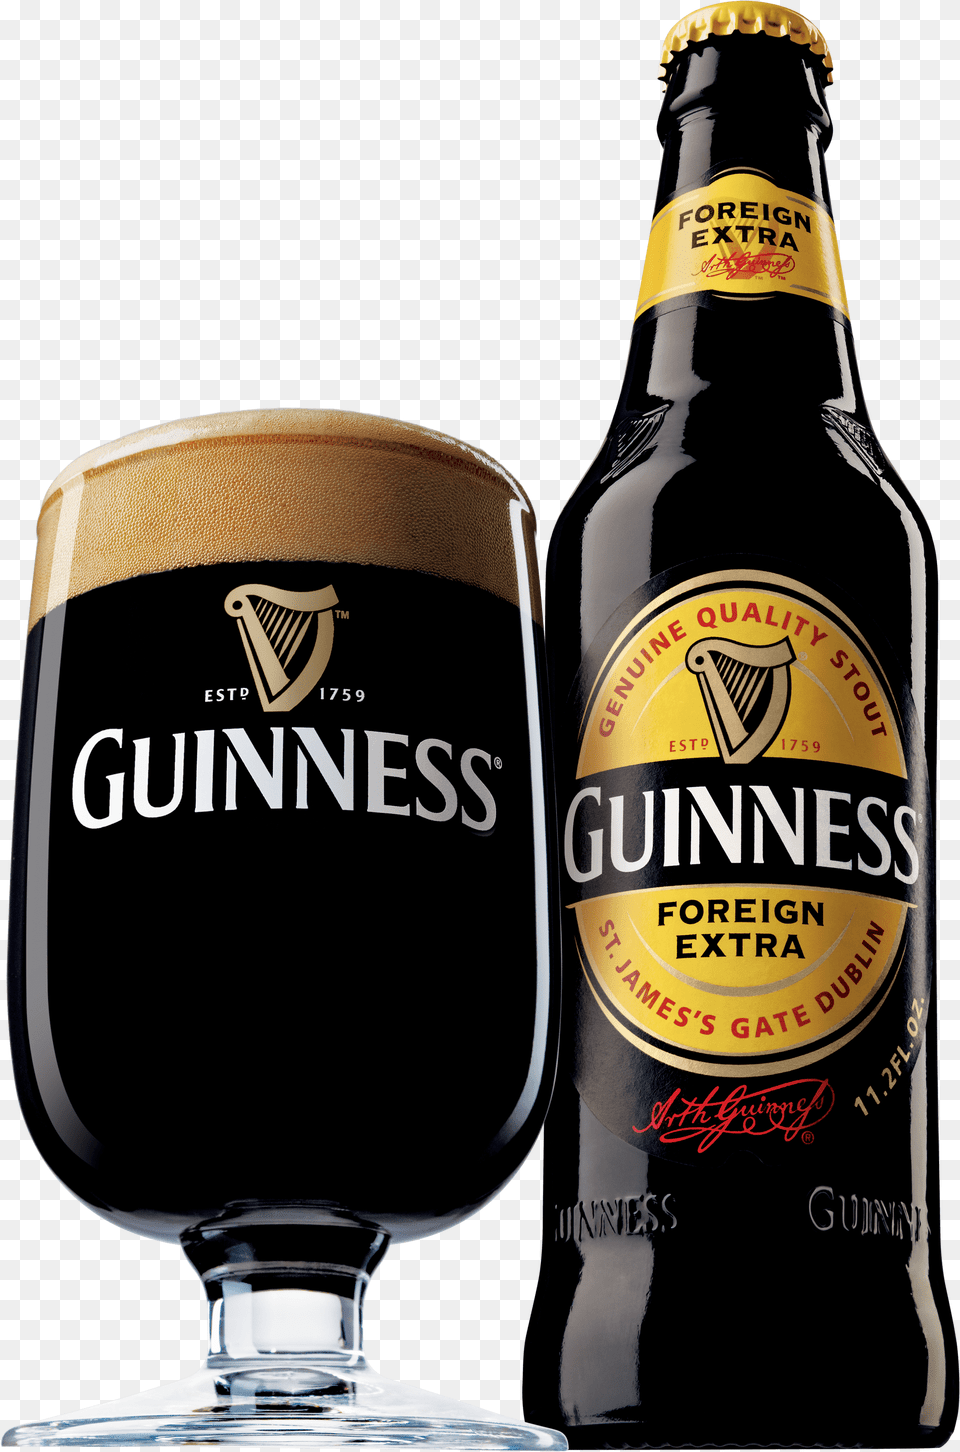 Guinness Foreign Extra Bottle And Glass Birra Guinness Extra Stout, Alcohol, Beer, Beverage Png